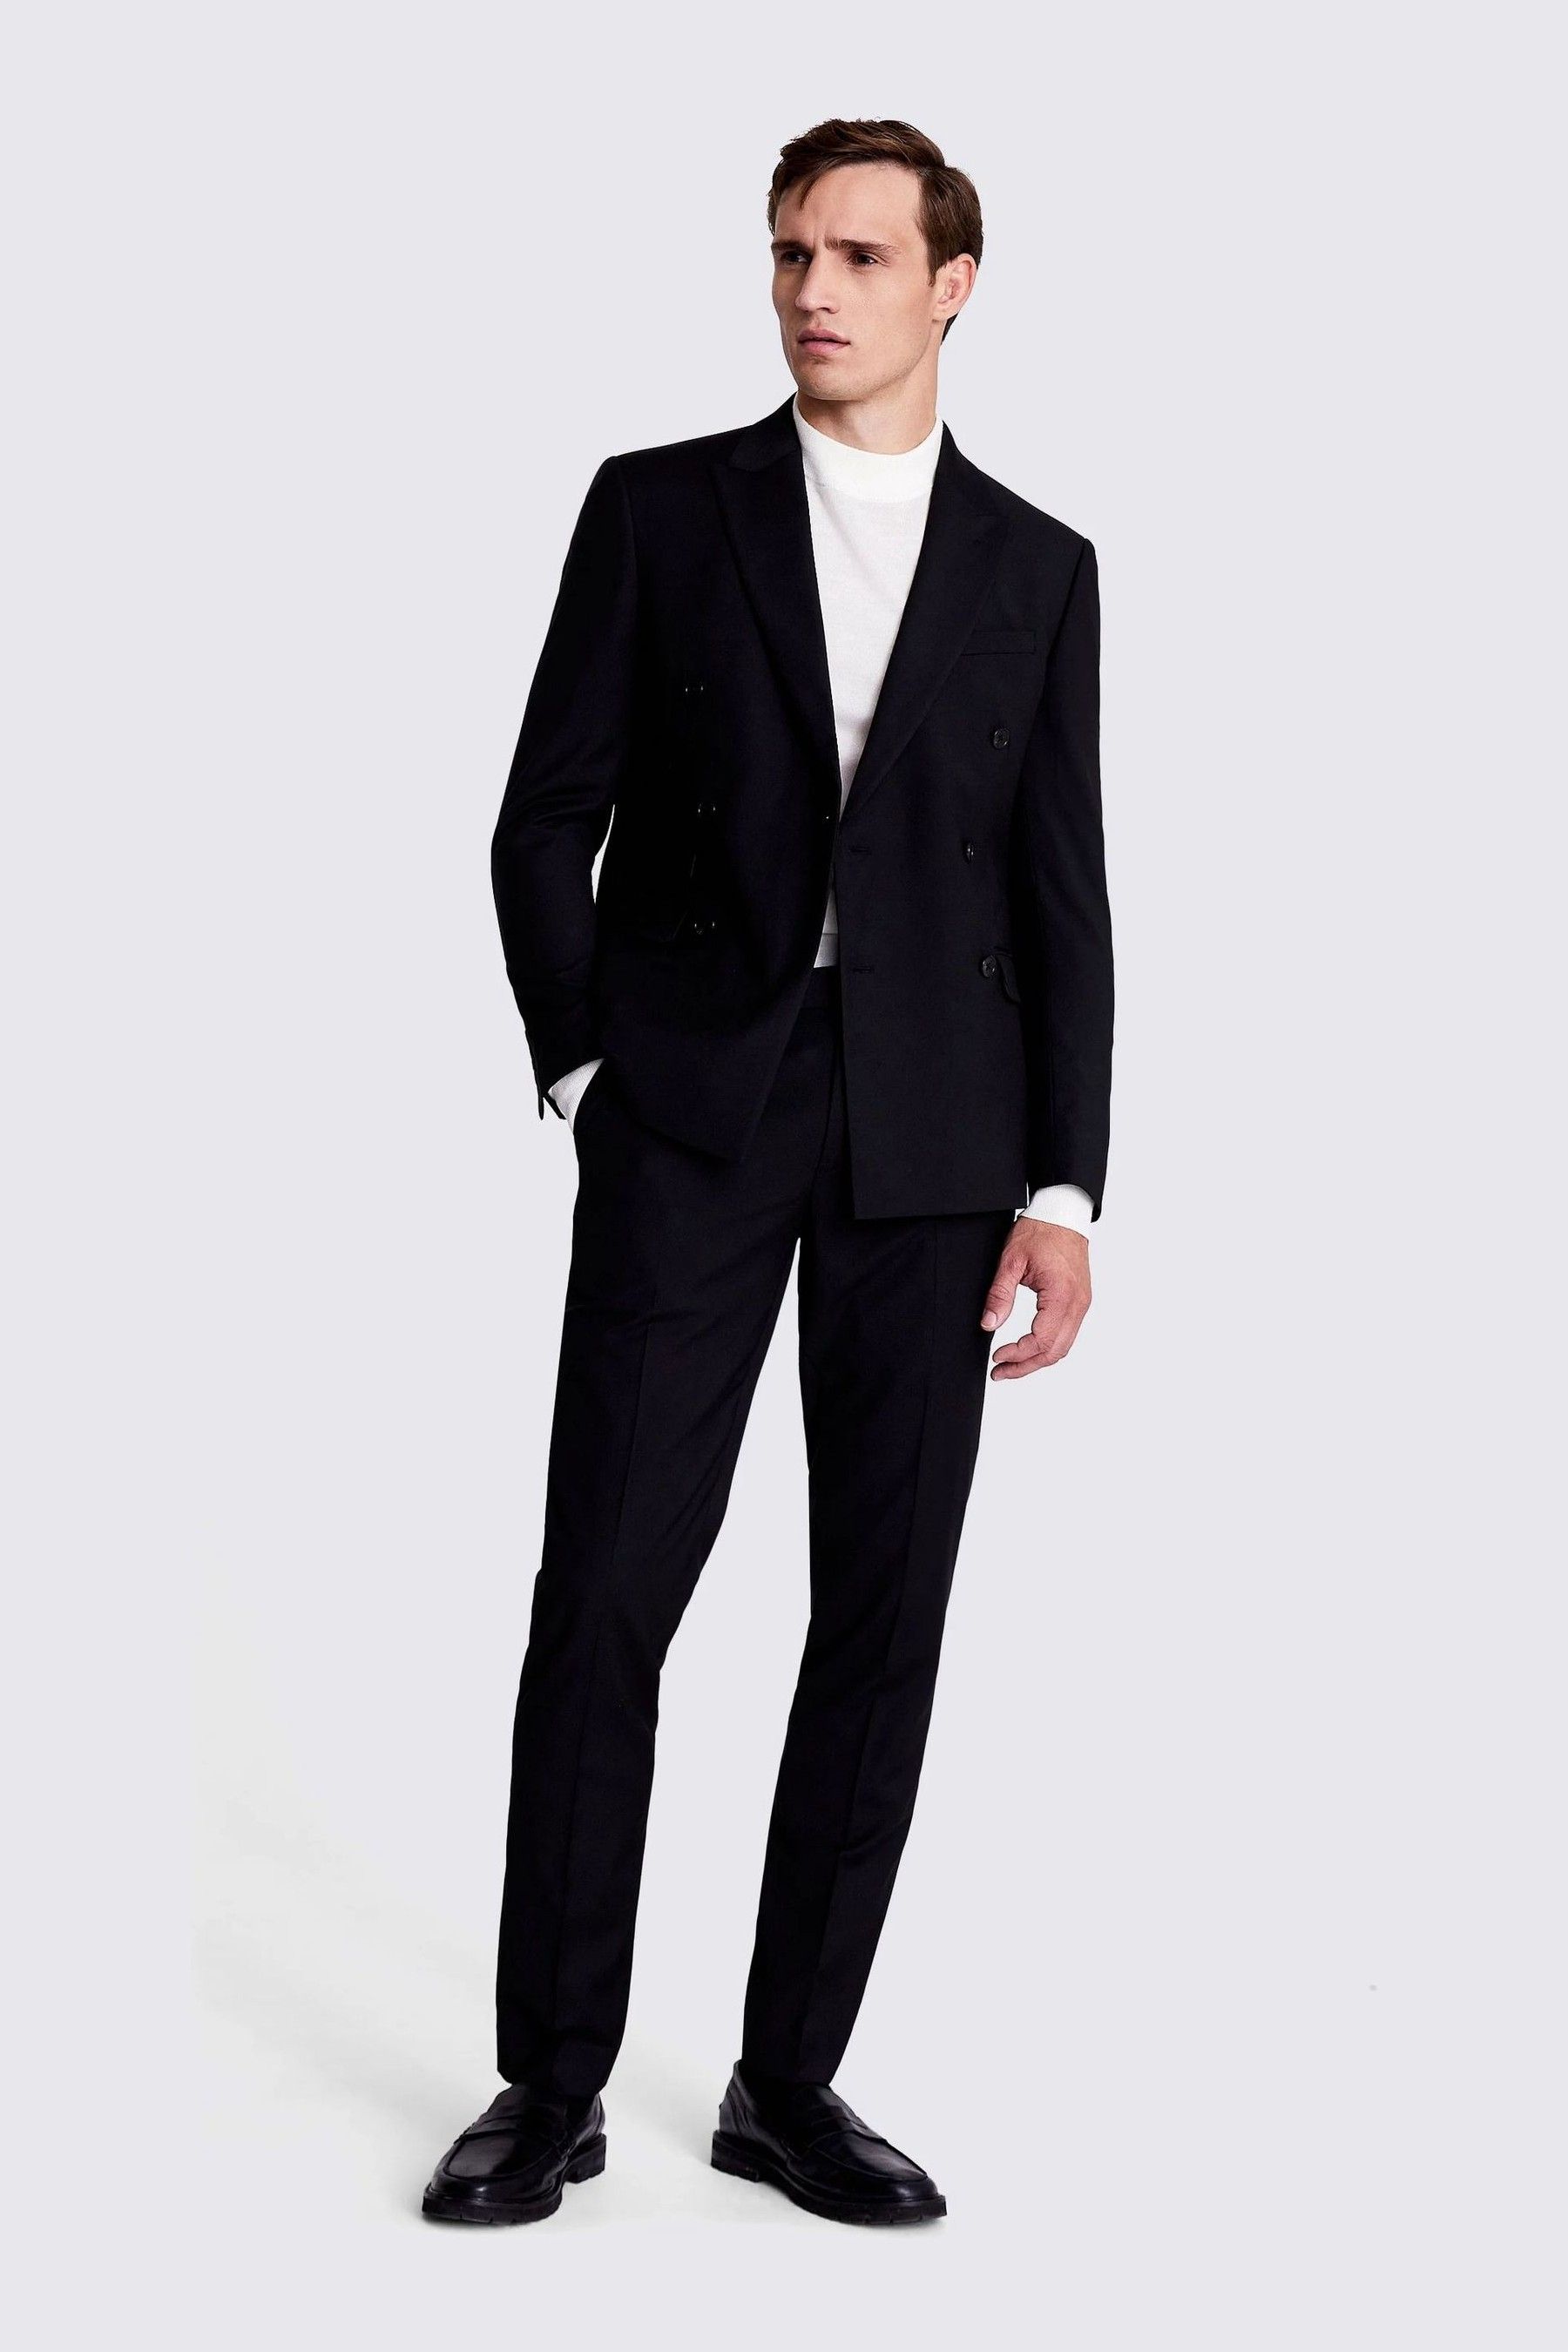 Buy MOSS Black Slim Fit Double Breasted Stretch Suit: Jacket from the ...